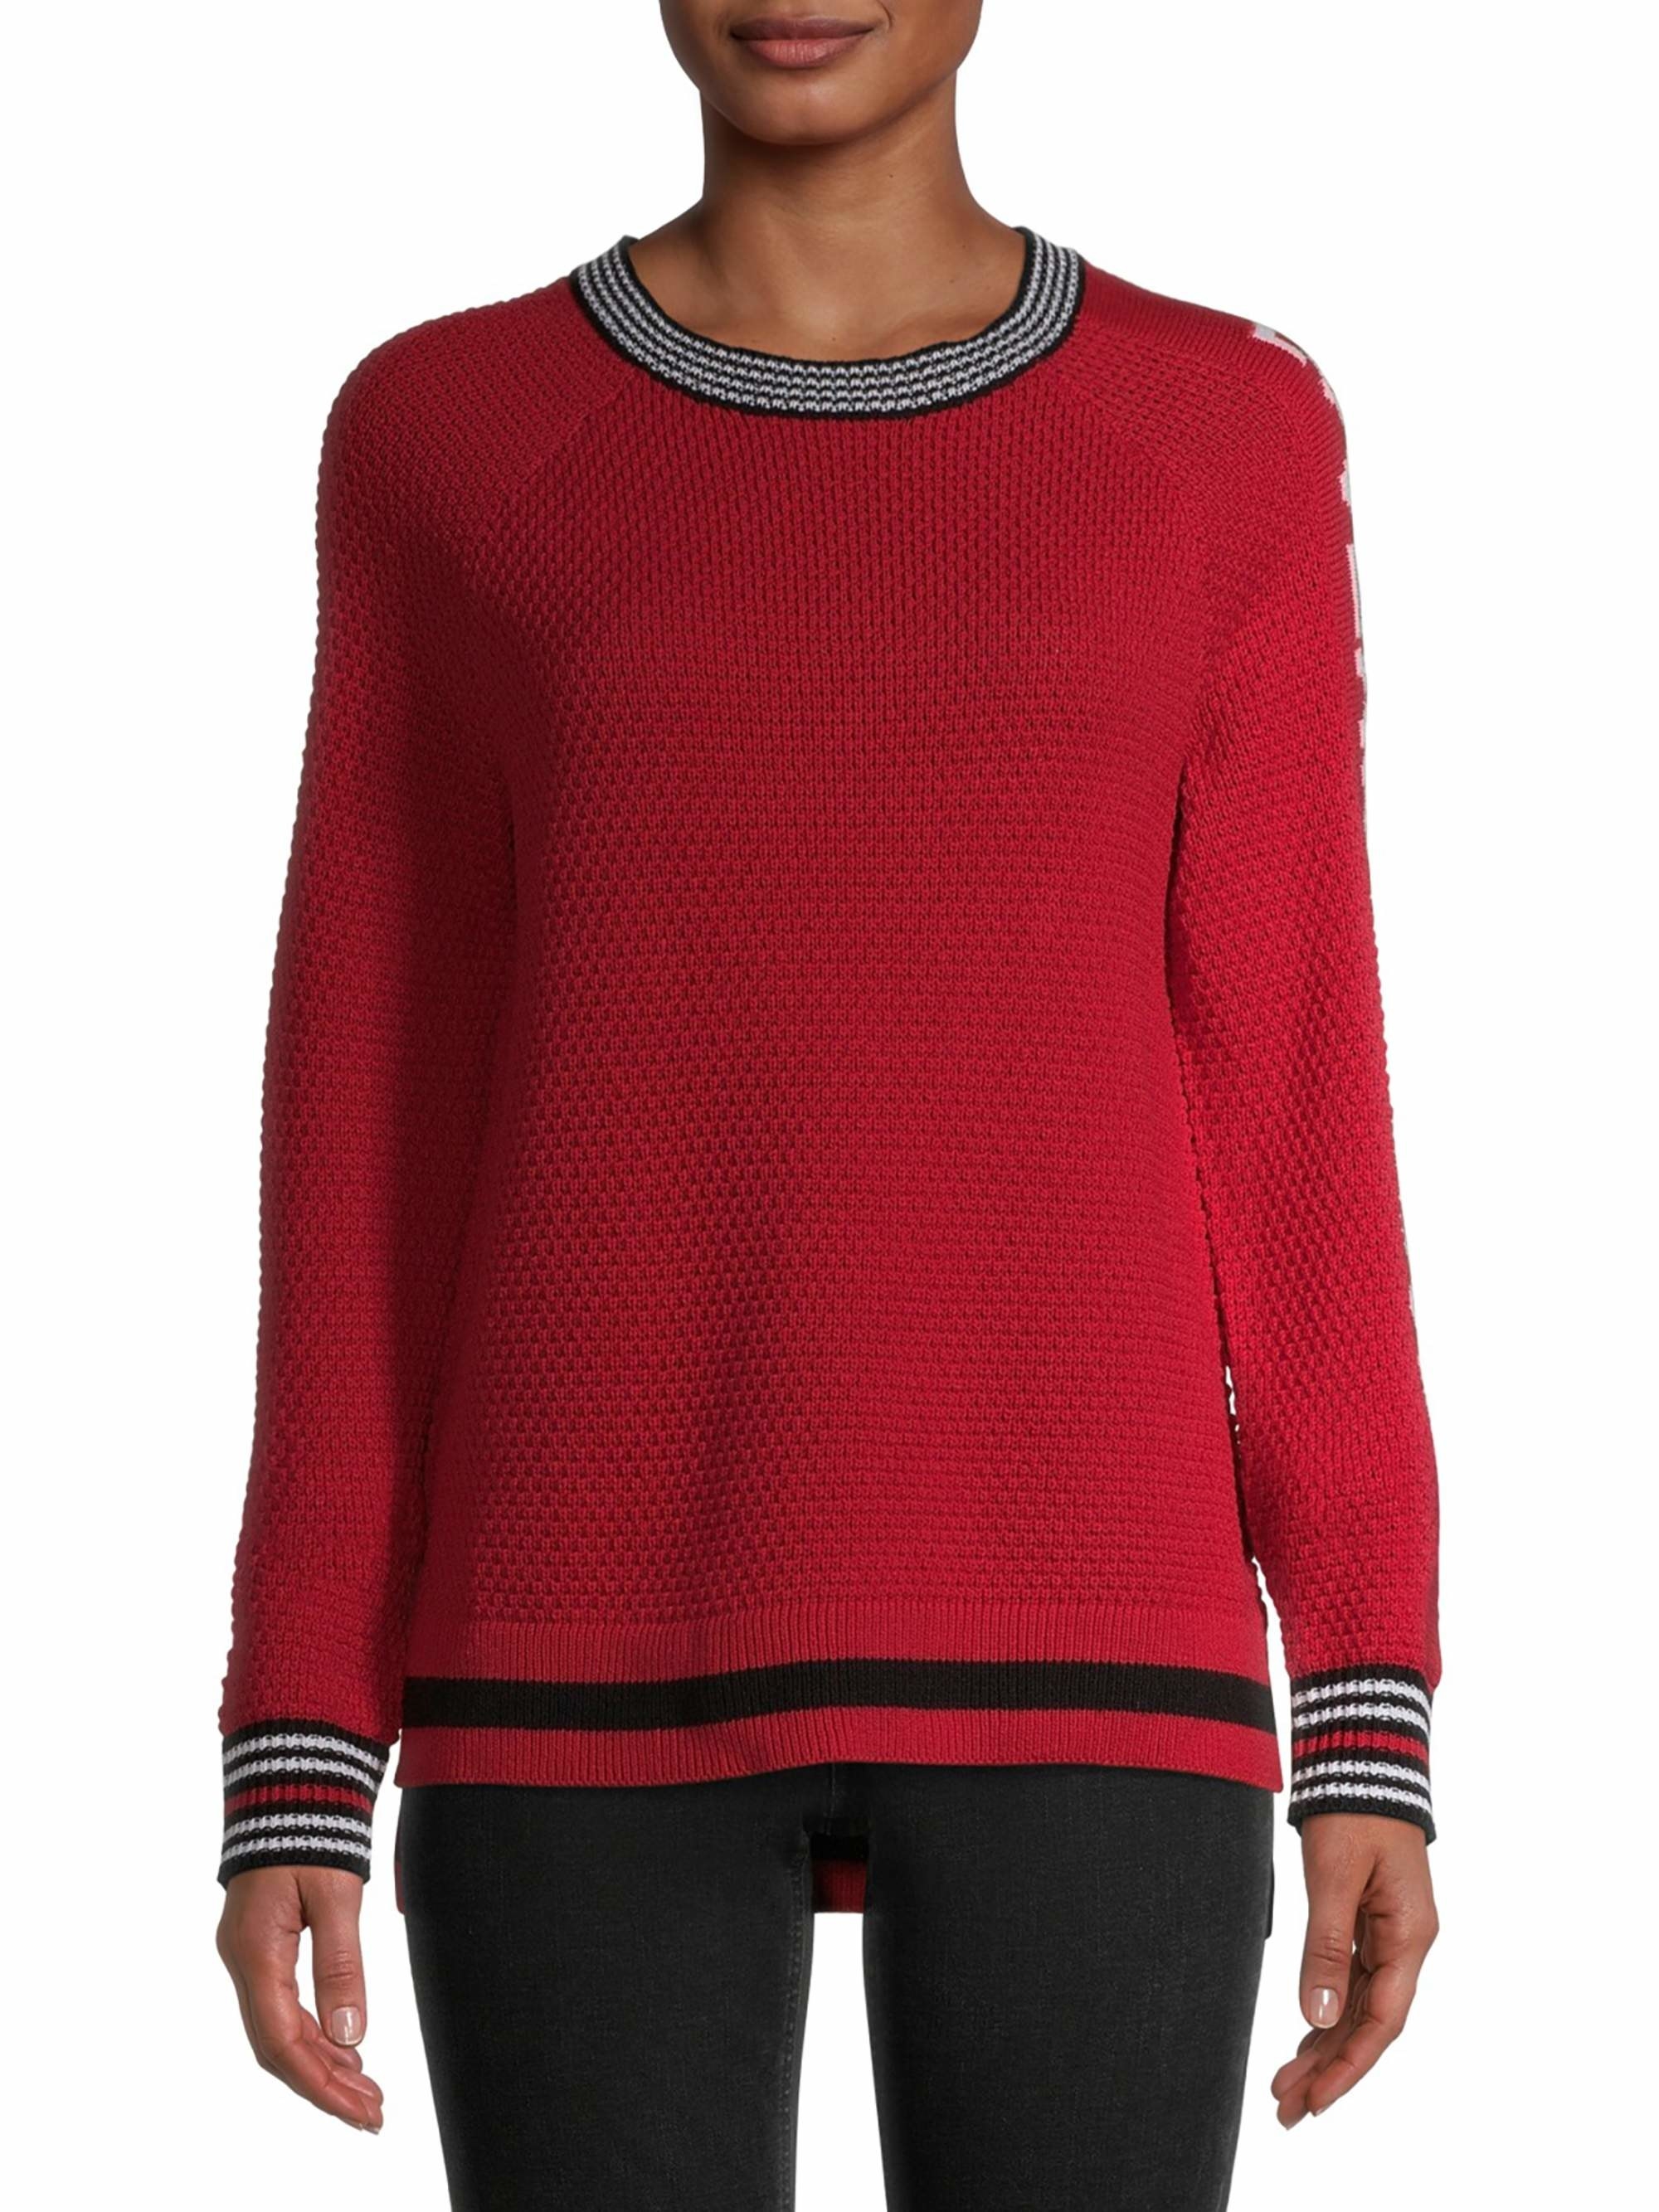 Model wearing a red pullover